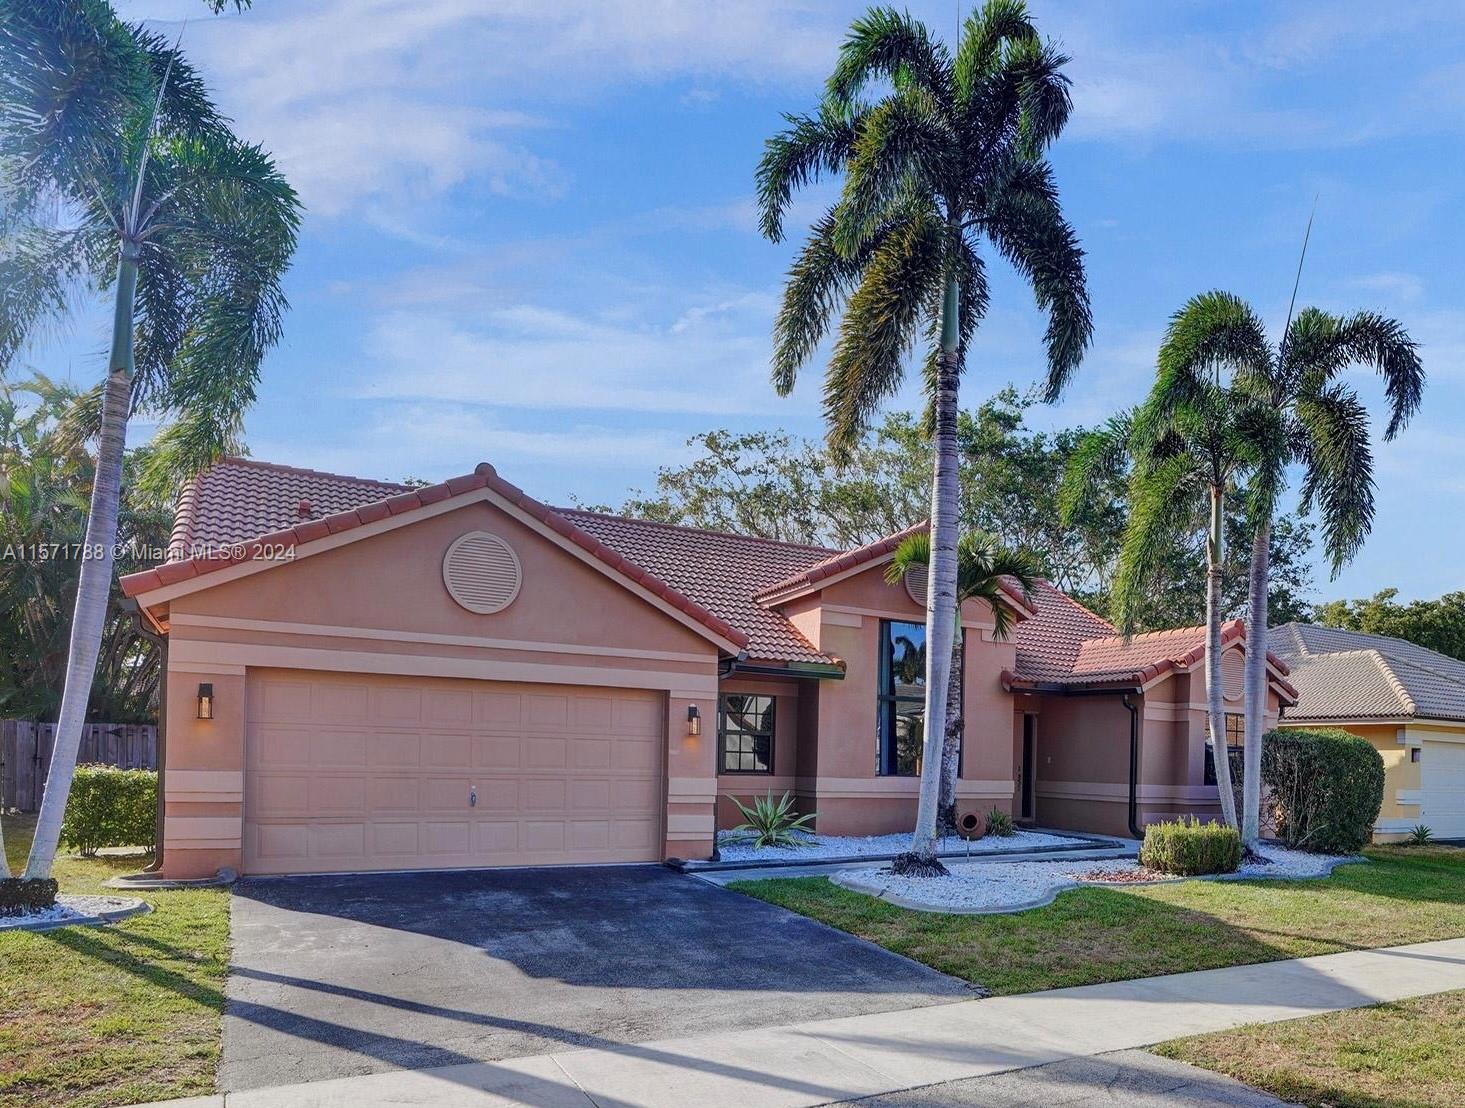 3095  Perriwinkle Cir  For Sale A11571788, FL